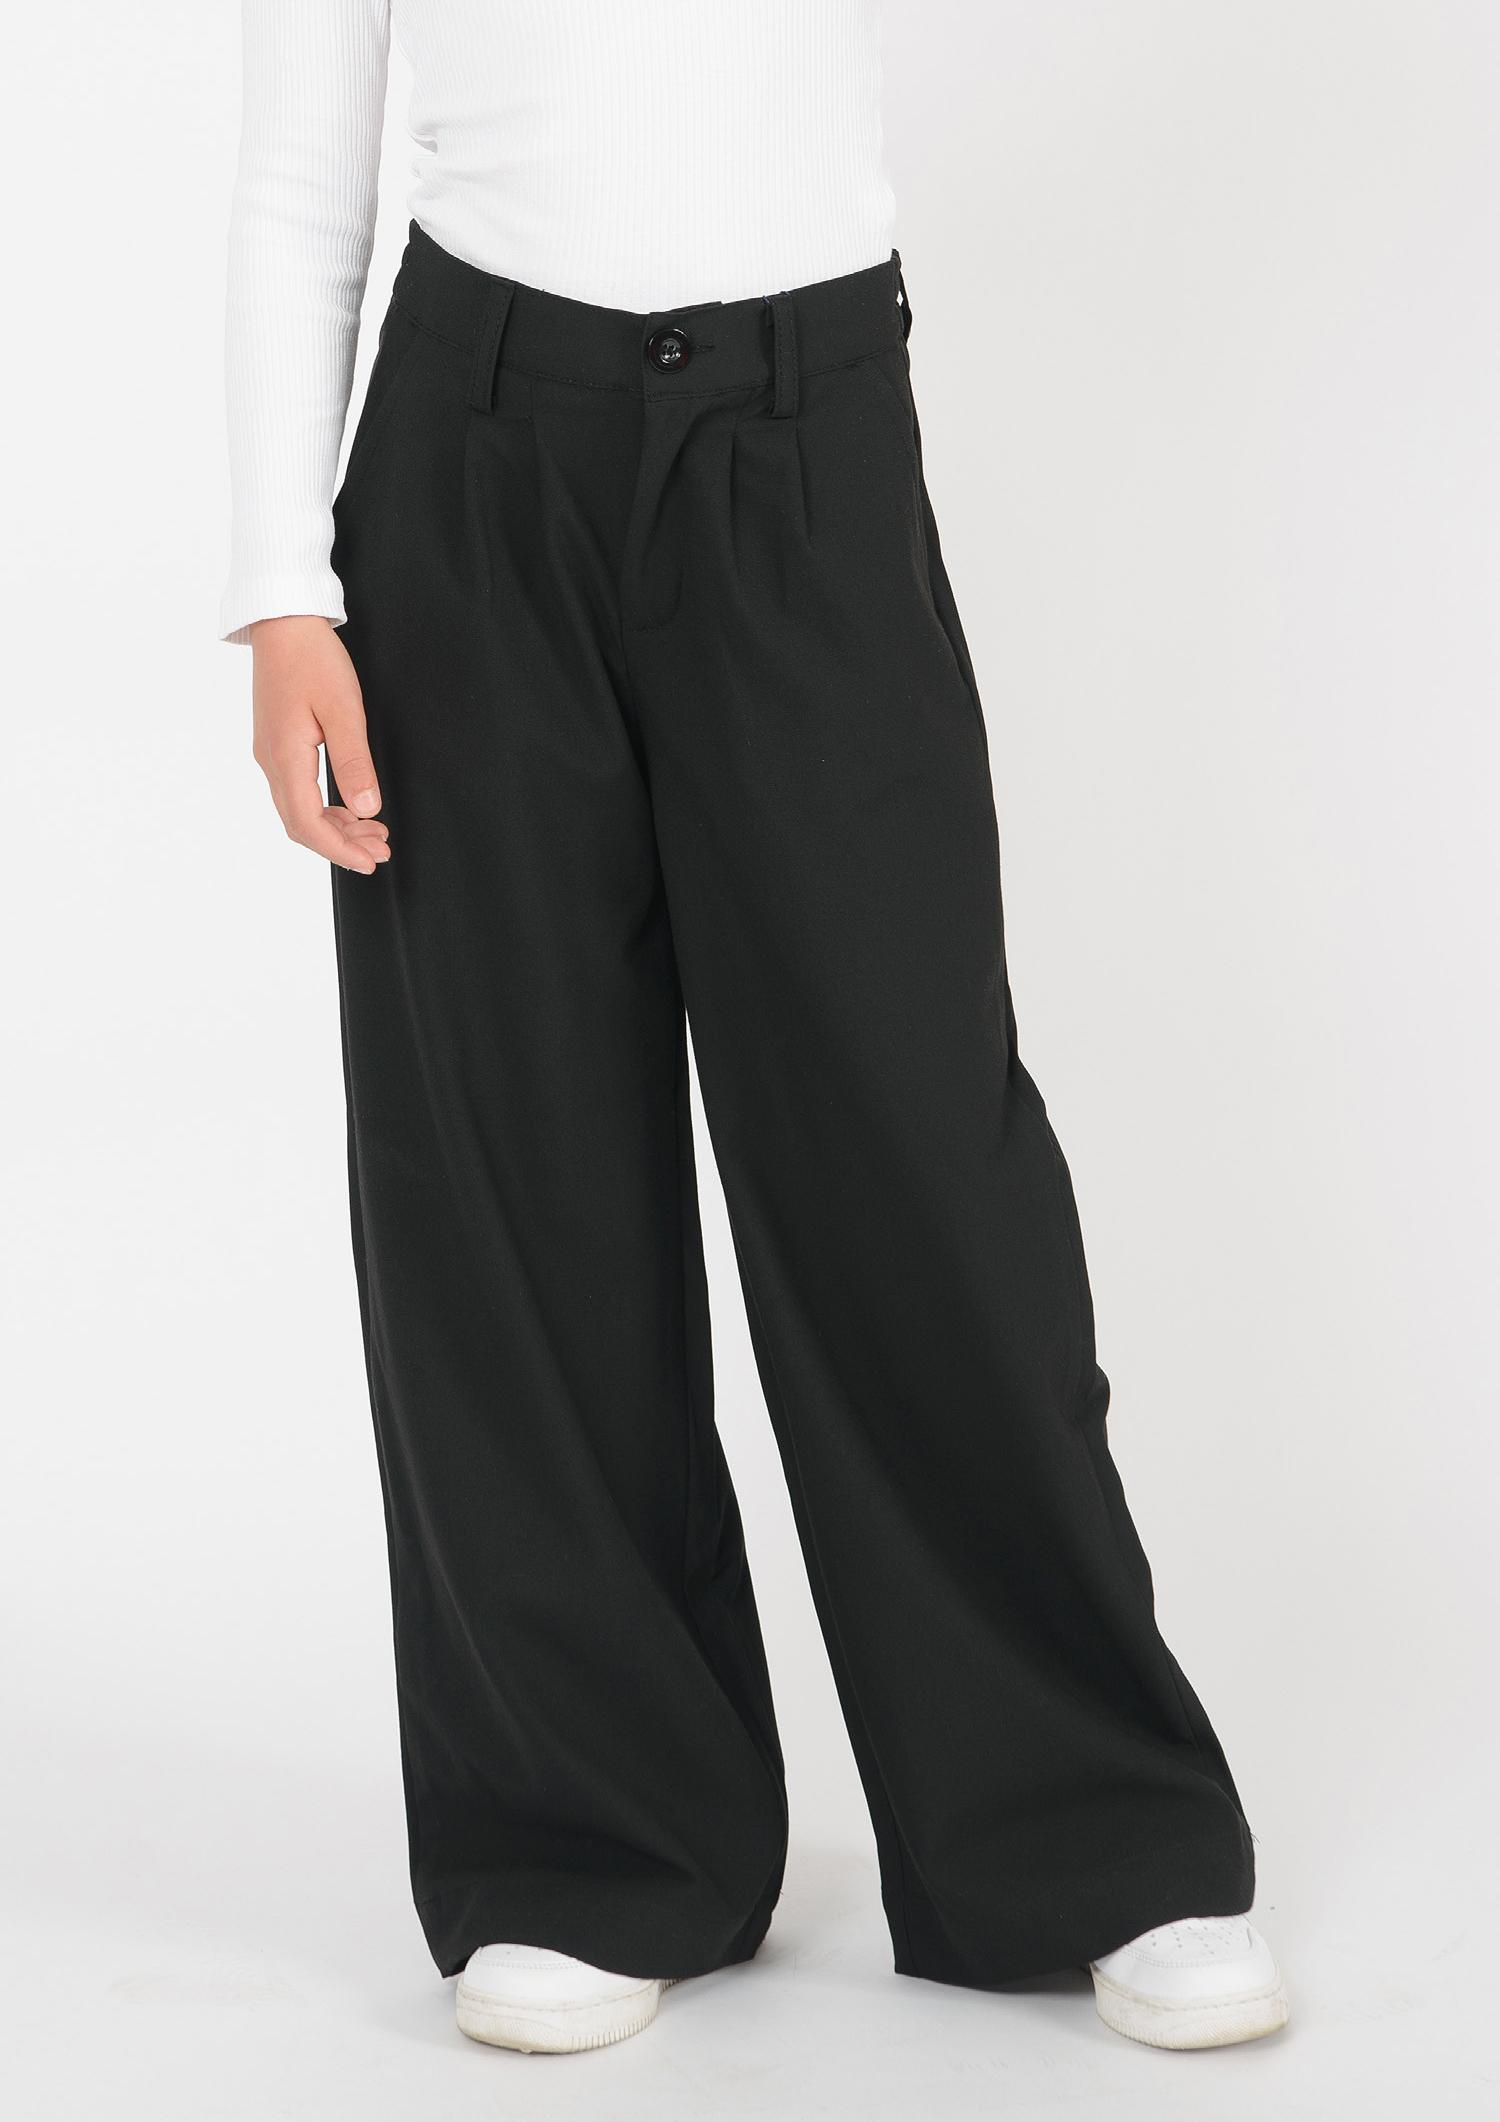 1370-Girls Wide Leg Pant available in Normal